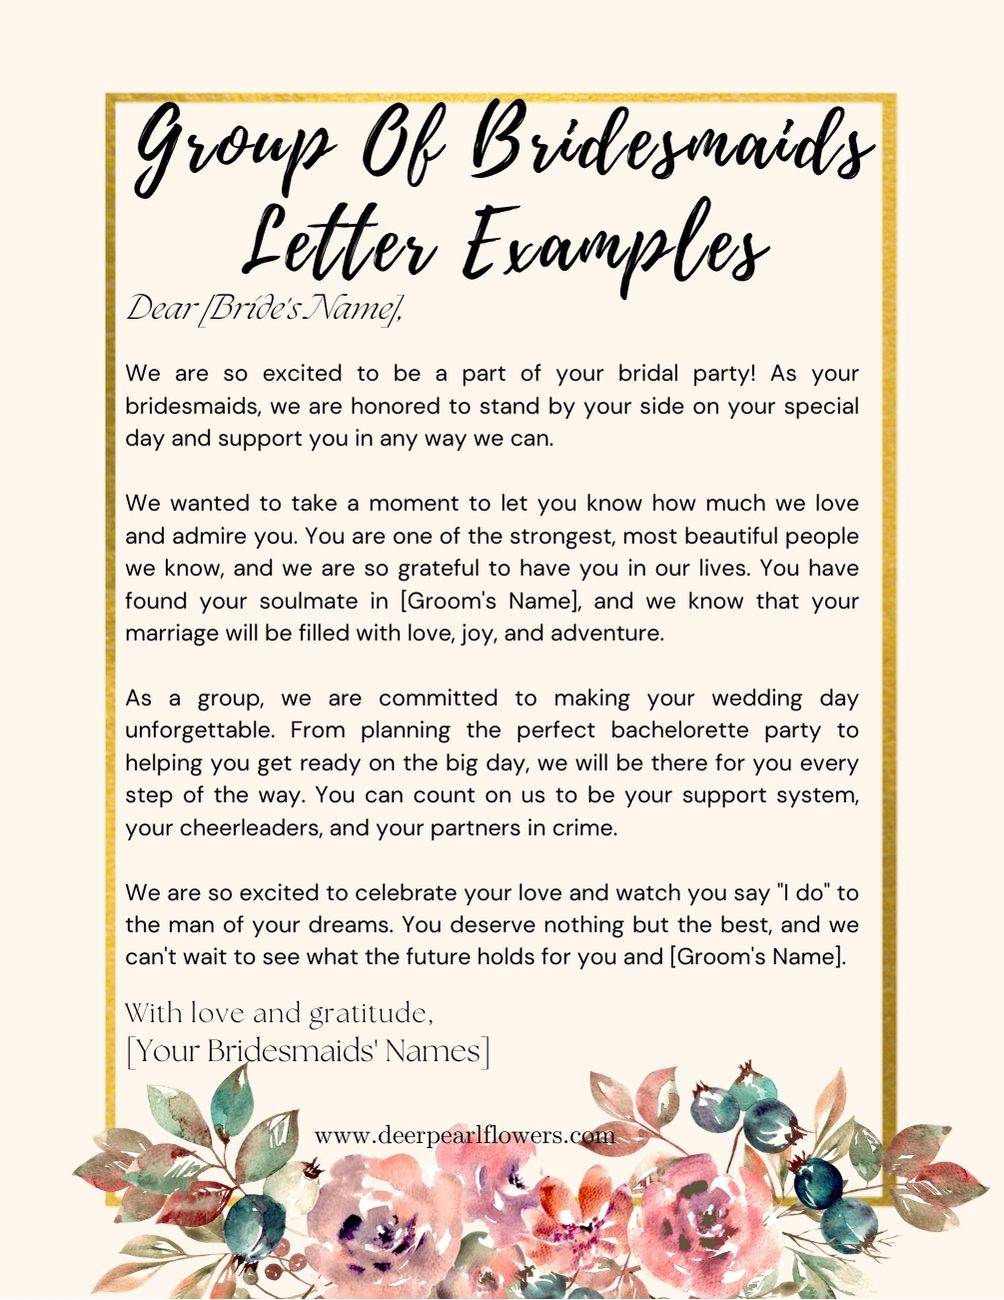 Group Of Bridesmaids Letter to Bride Examples